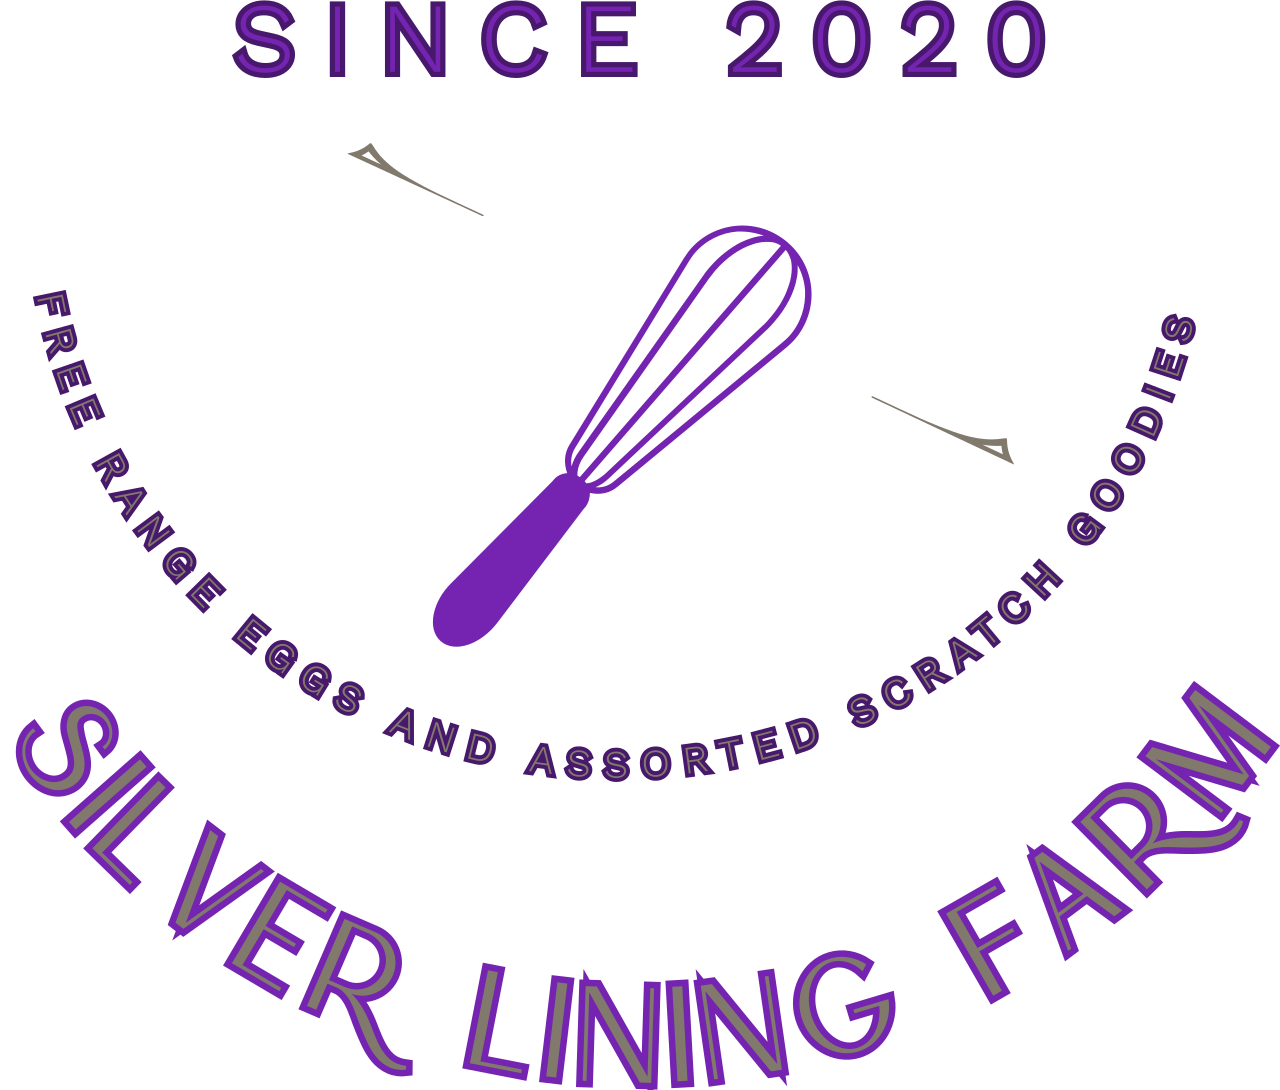 Silver Lining Farm's web page